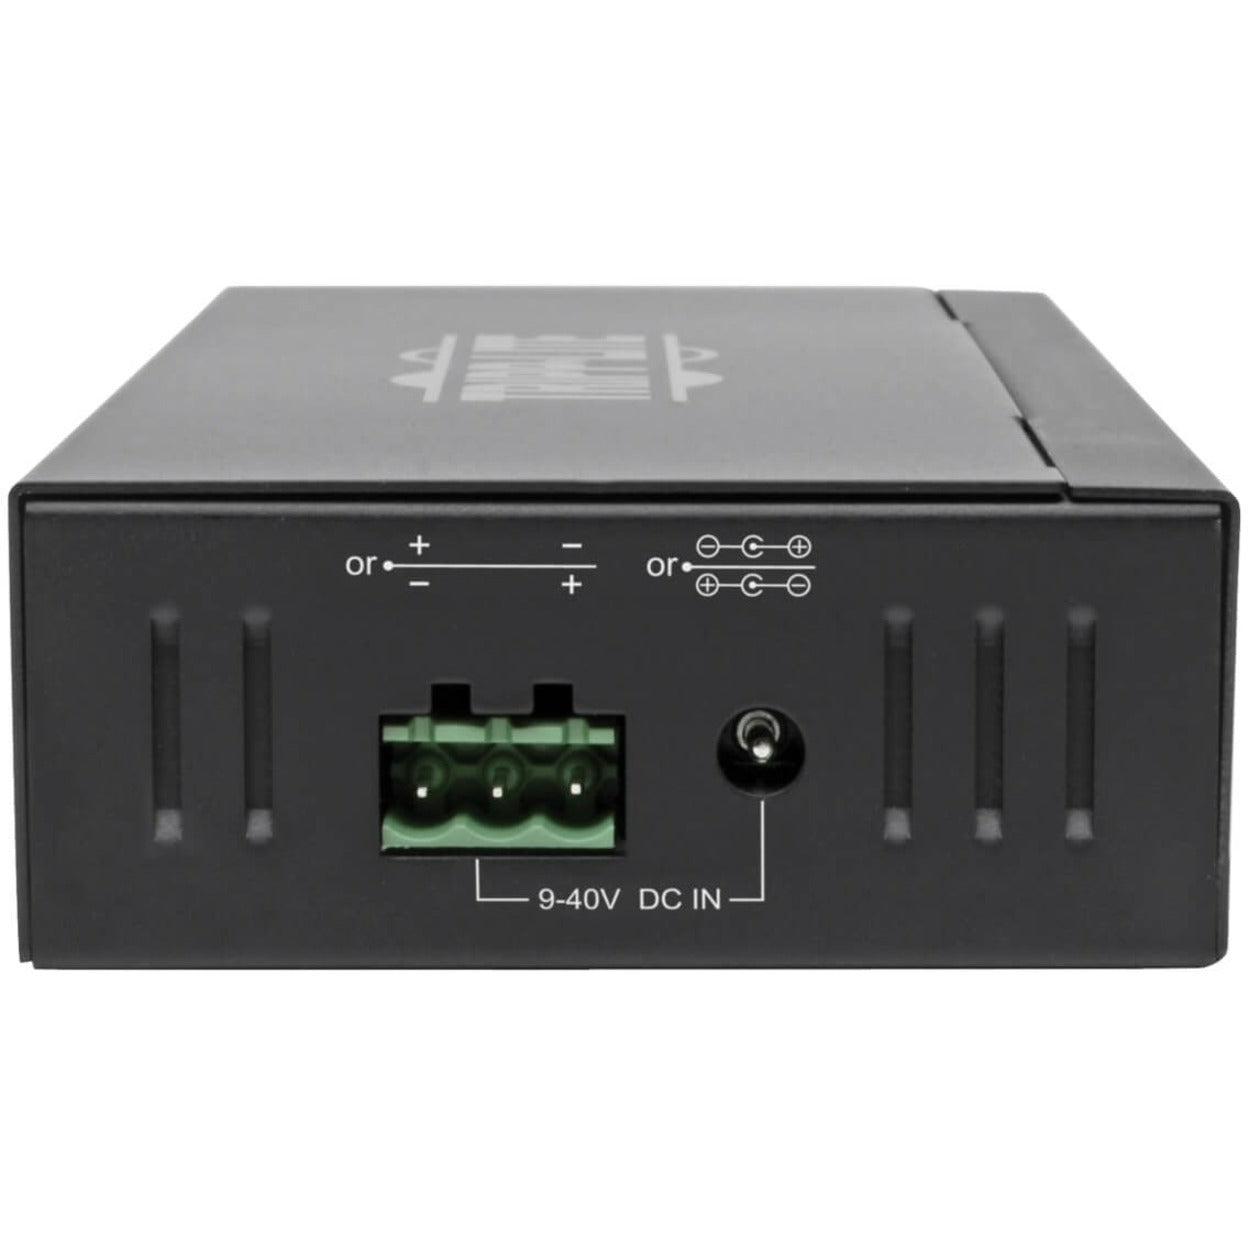 Tripp Lite U360-010-IND 10-Port Industrial-Grade USB 3.0 SuperSpeed Hub, Rugged and Reliable USB Hub for PC and Mac